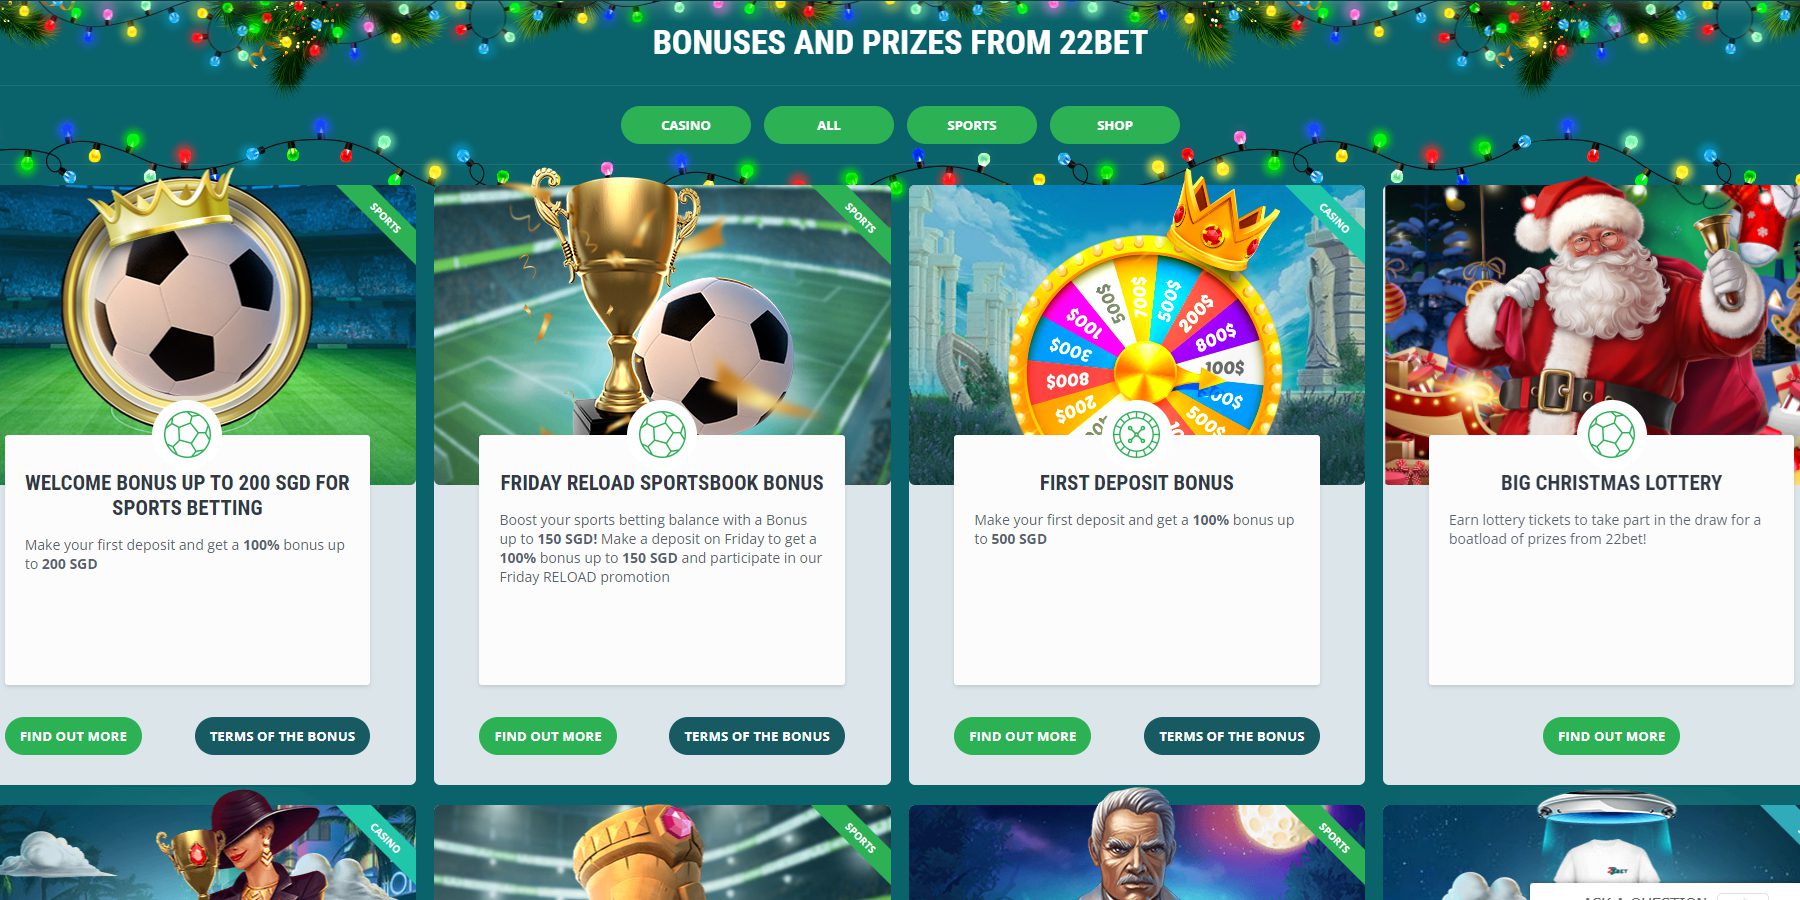 BET22 - Promotions Page